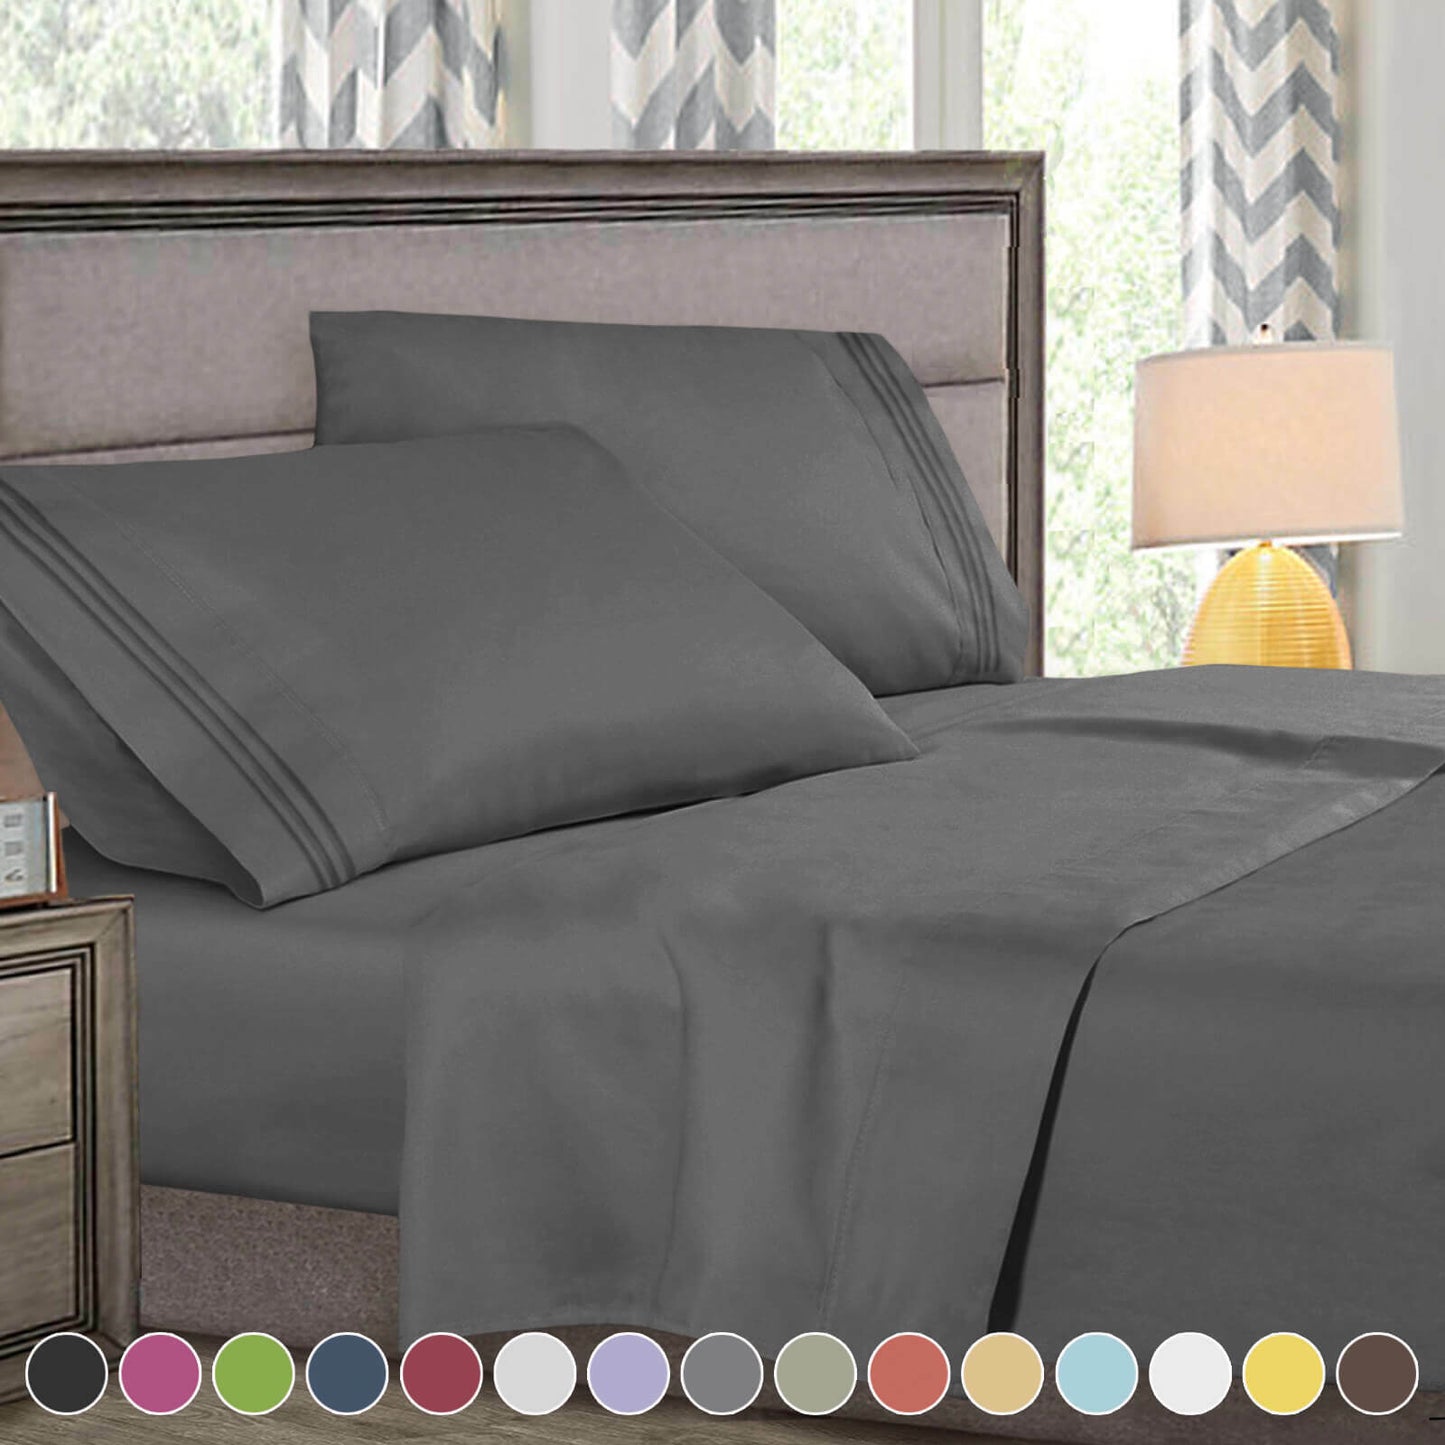 Bed Sheets - 4-Piece Deep Pocket Bed Sheet Set - 1800 Collection Hotel Quality - Queen / Gray